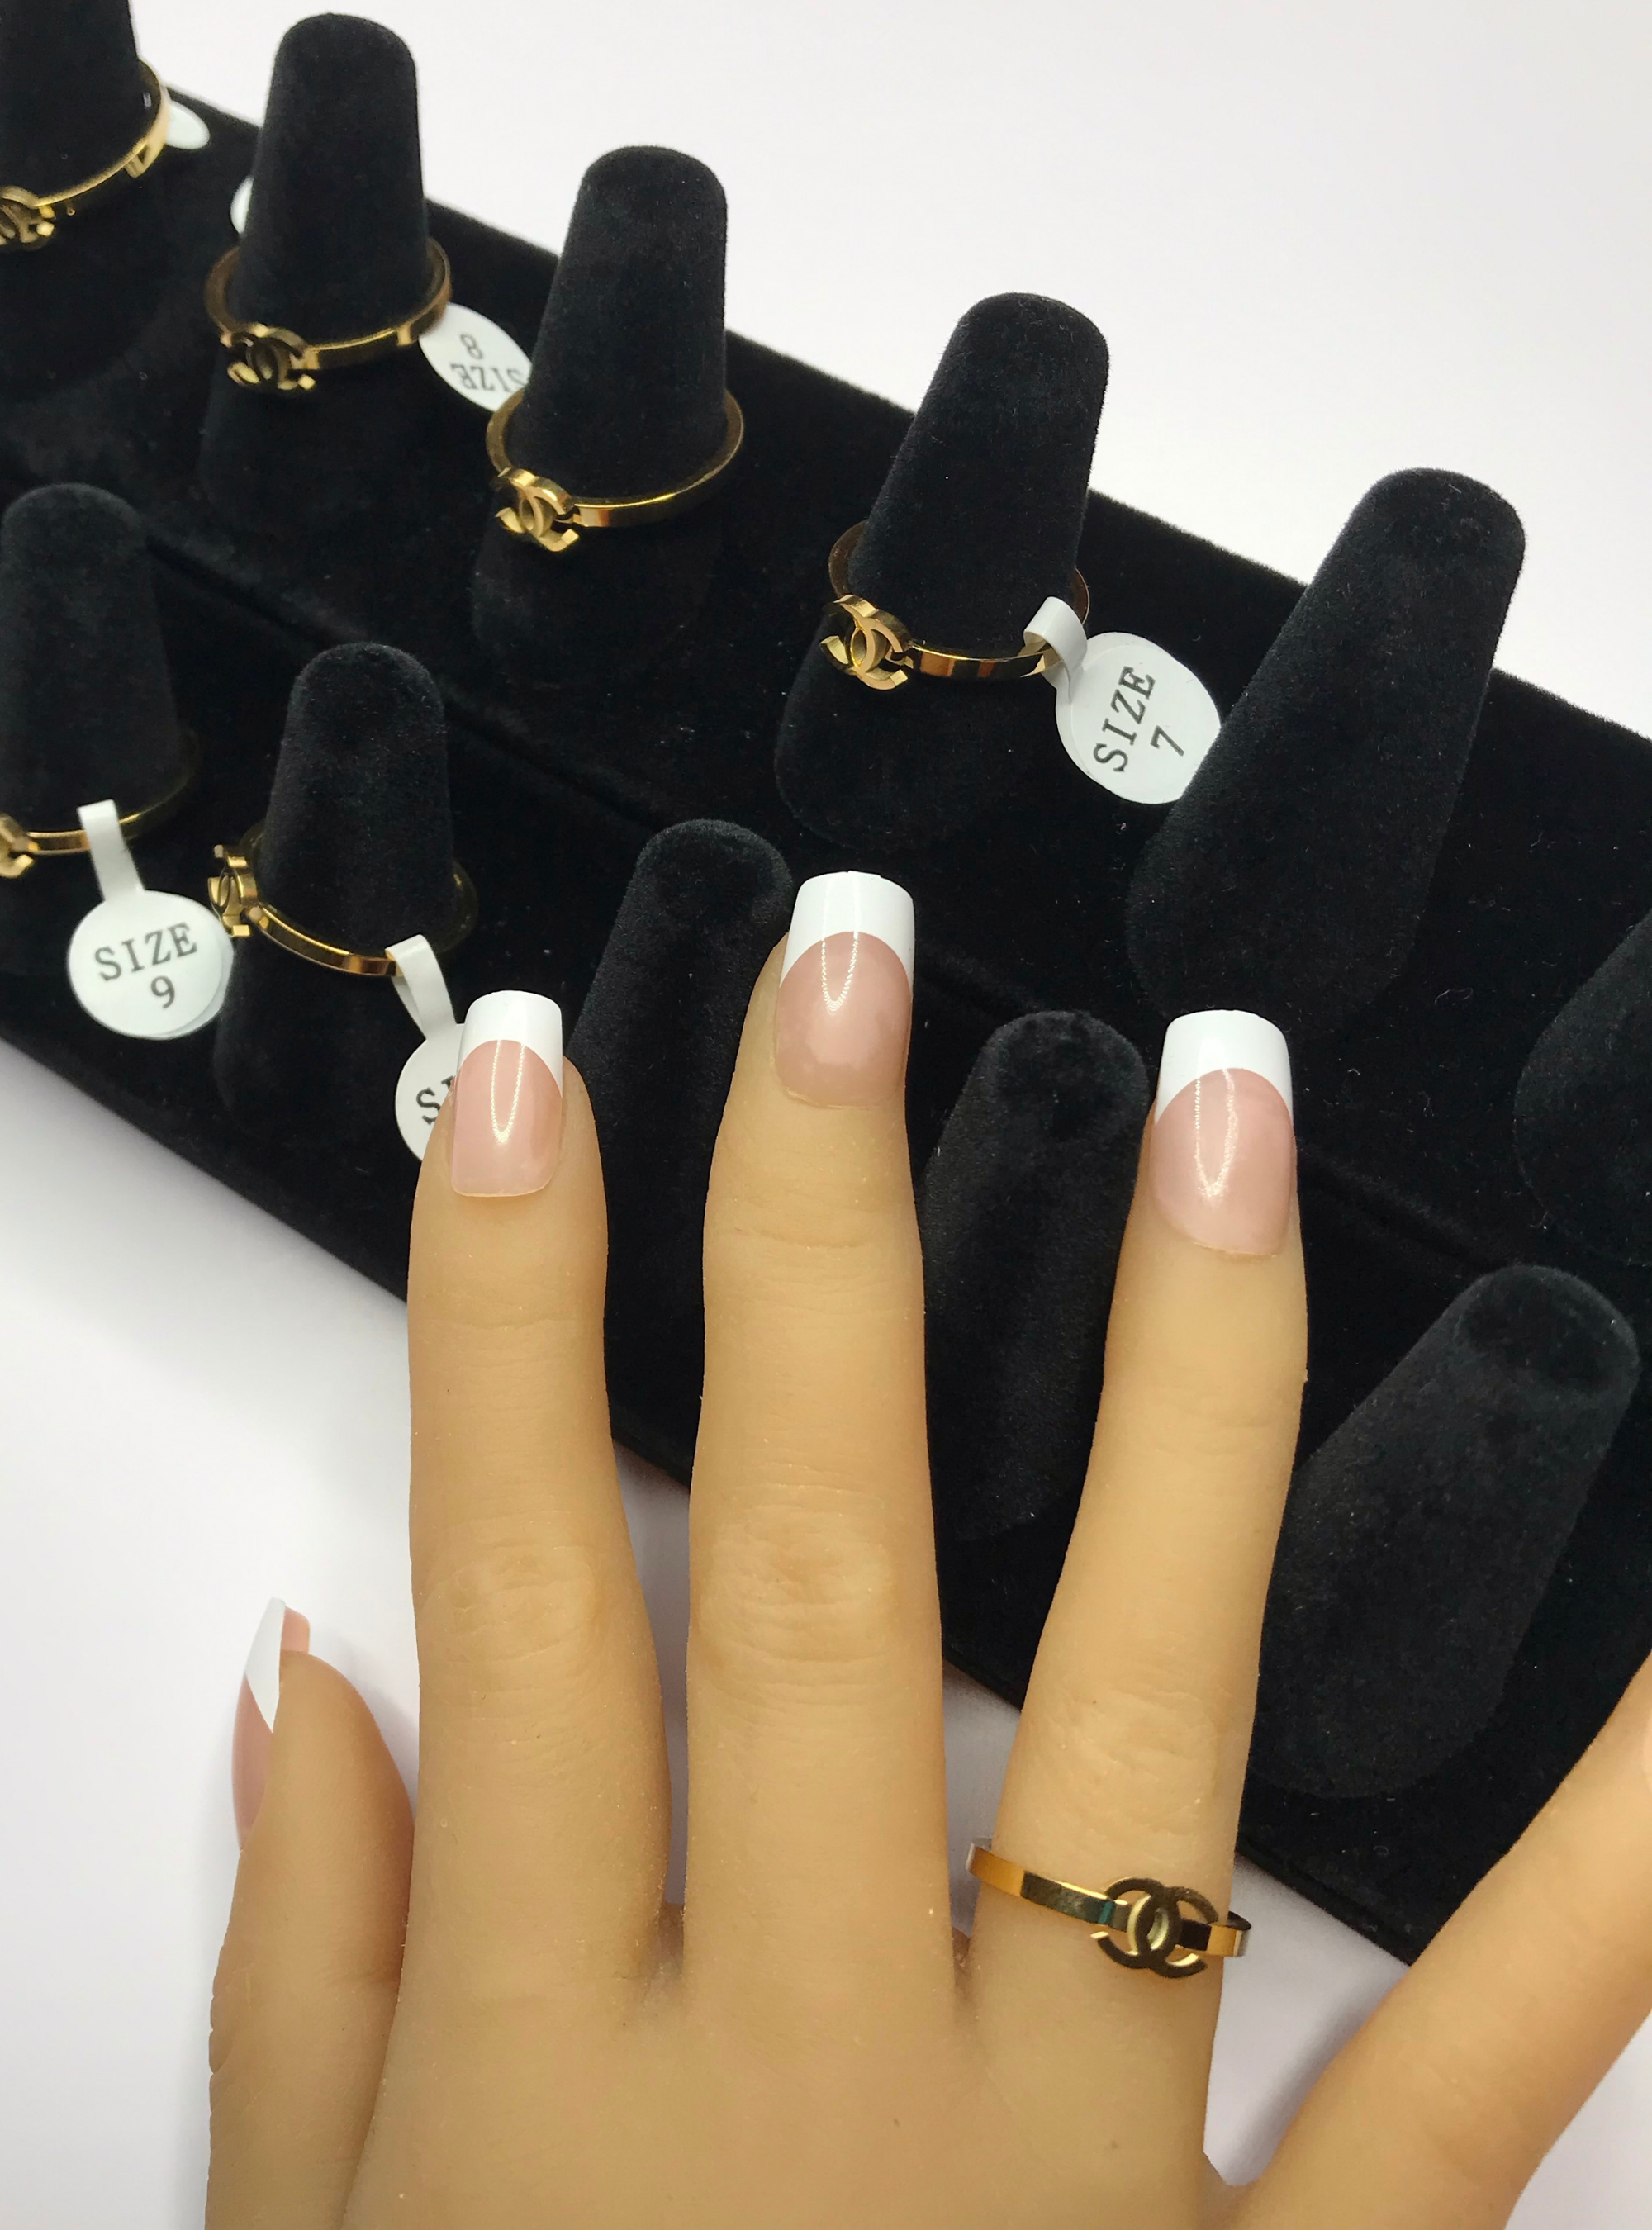 diamond chanel charms for nails